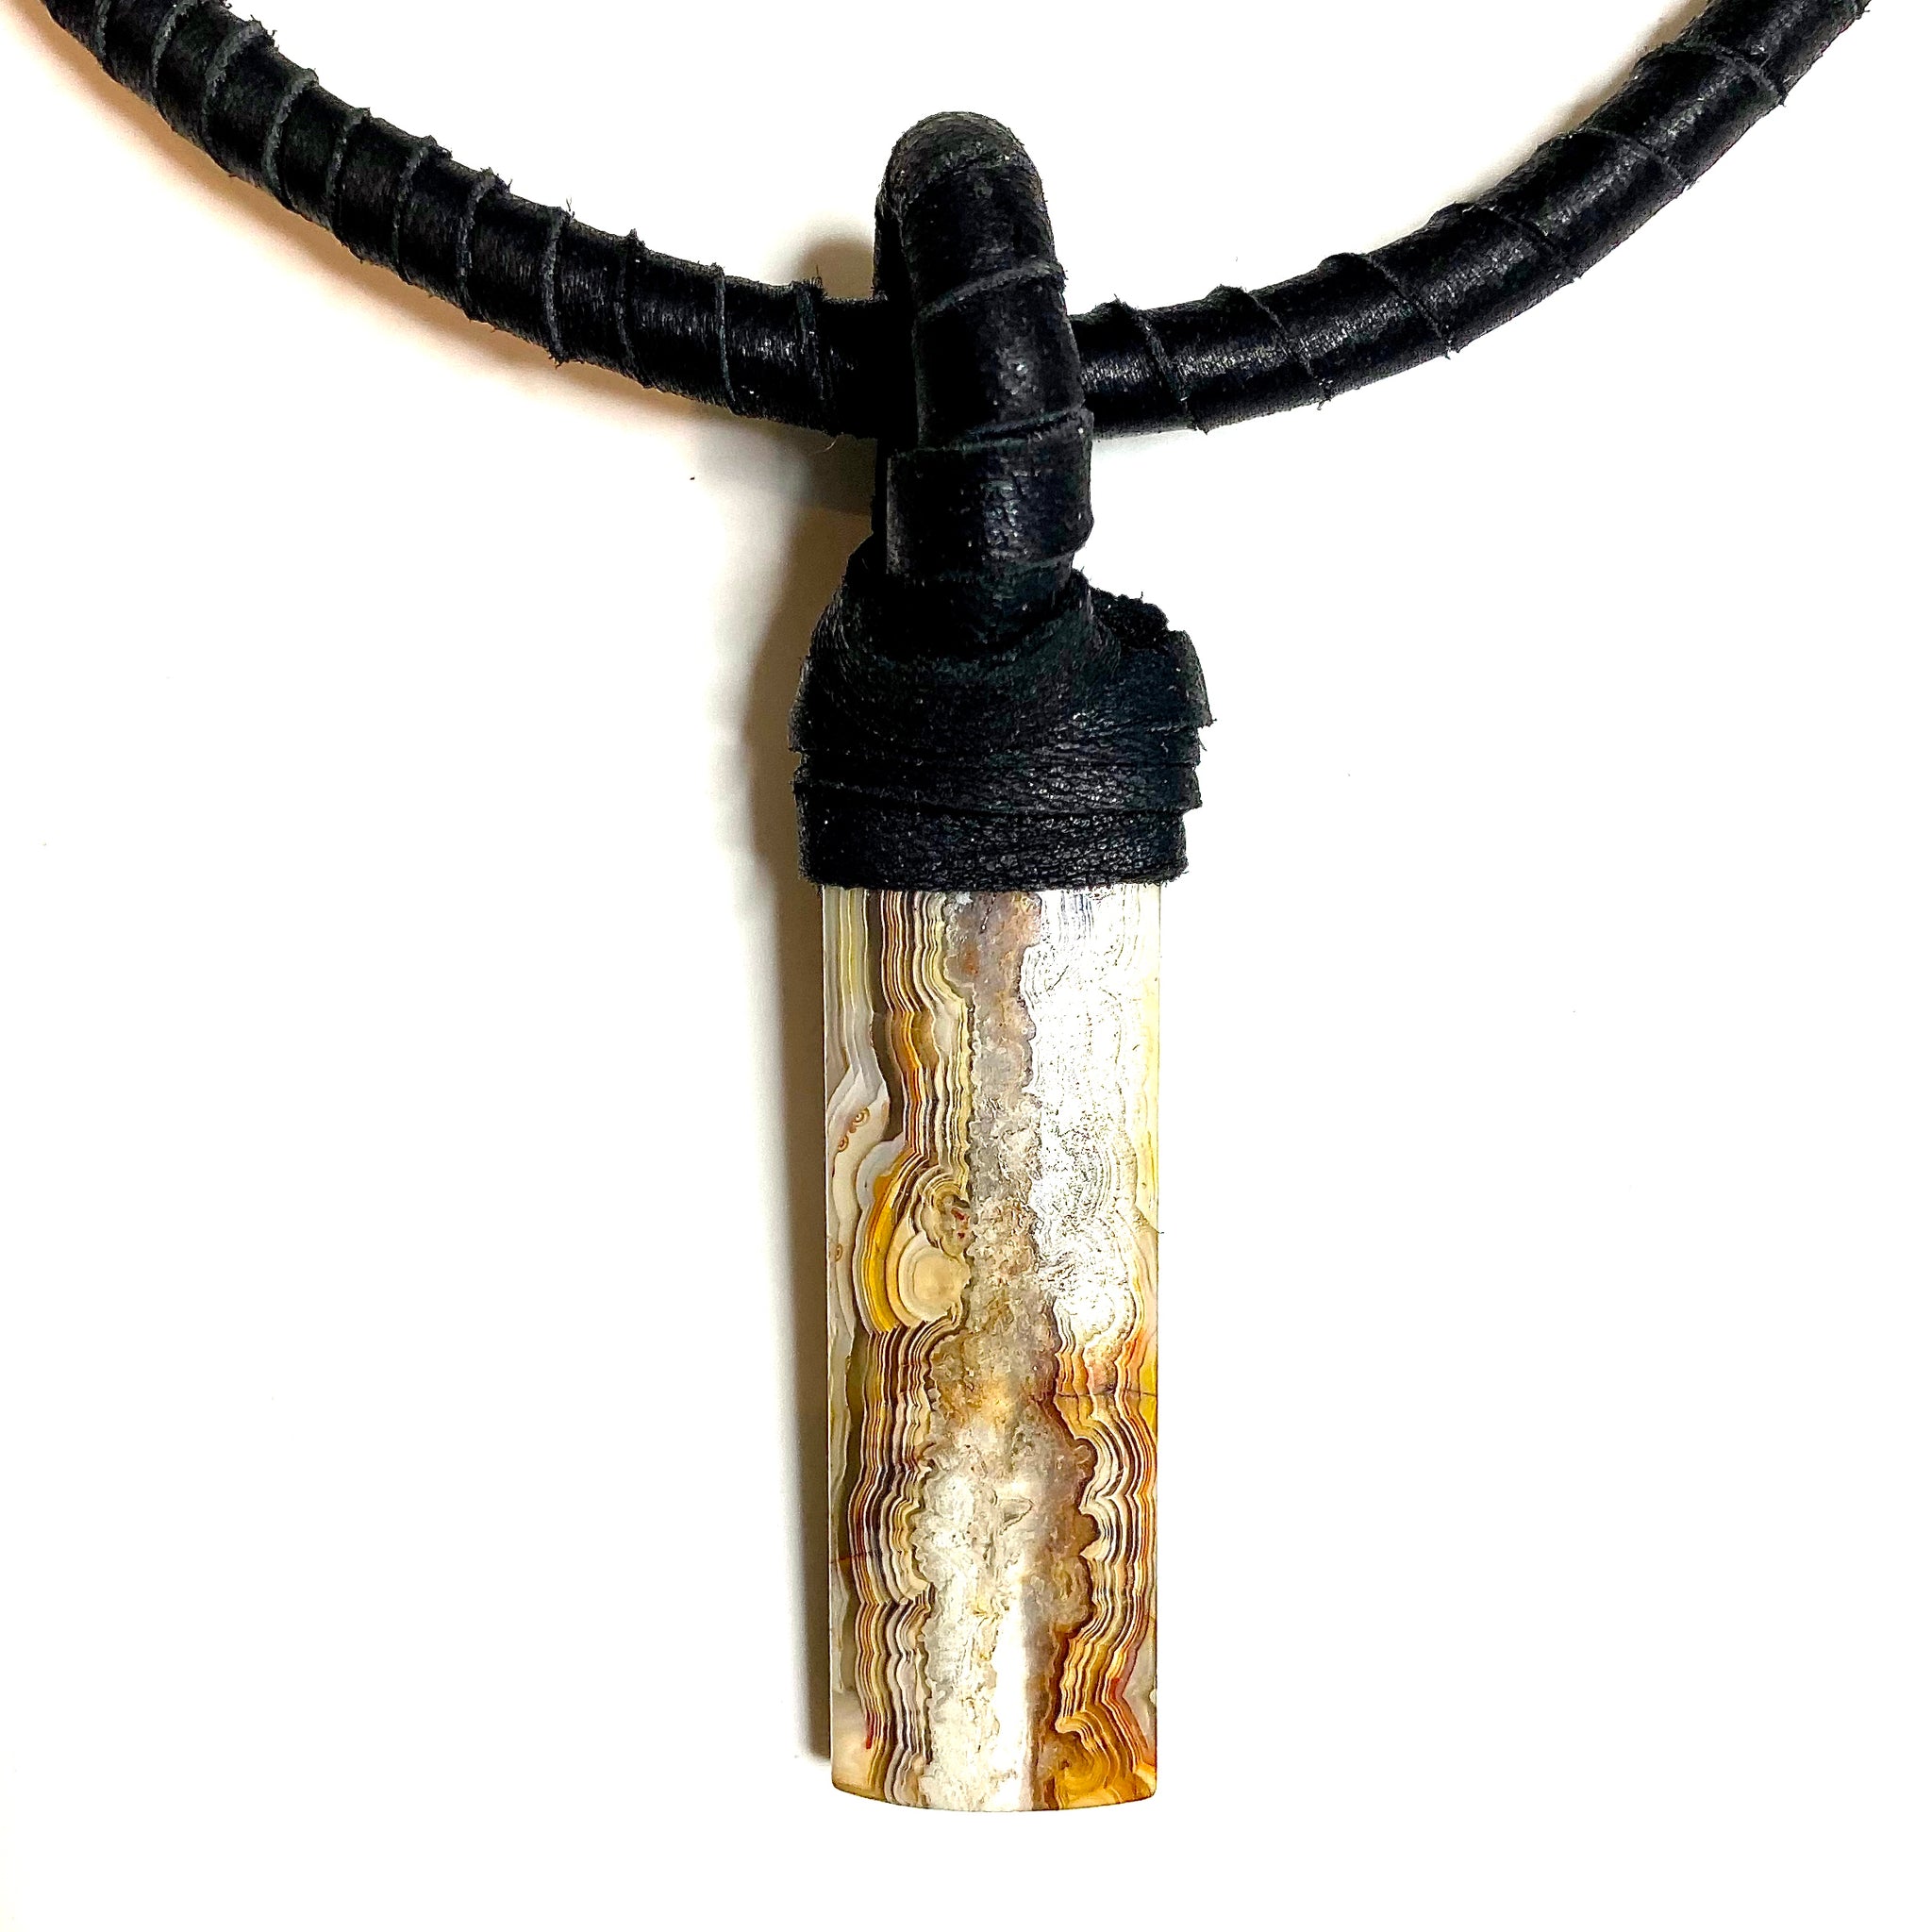 Deerskin necklace with Laguna Lace Agate stone by NYET Jewelry.